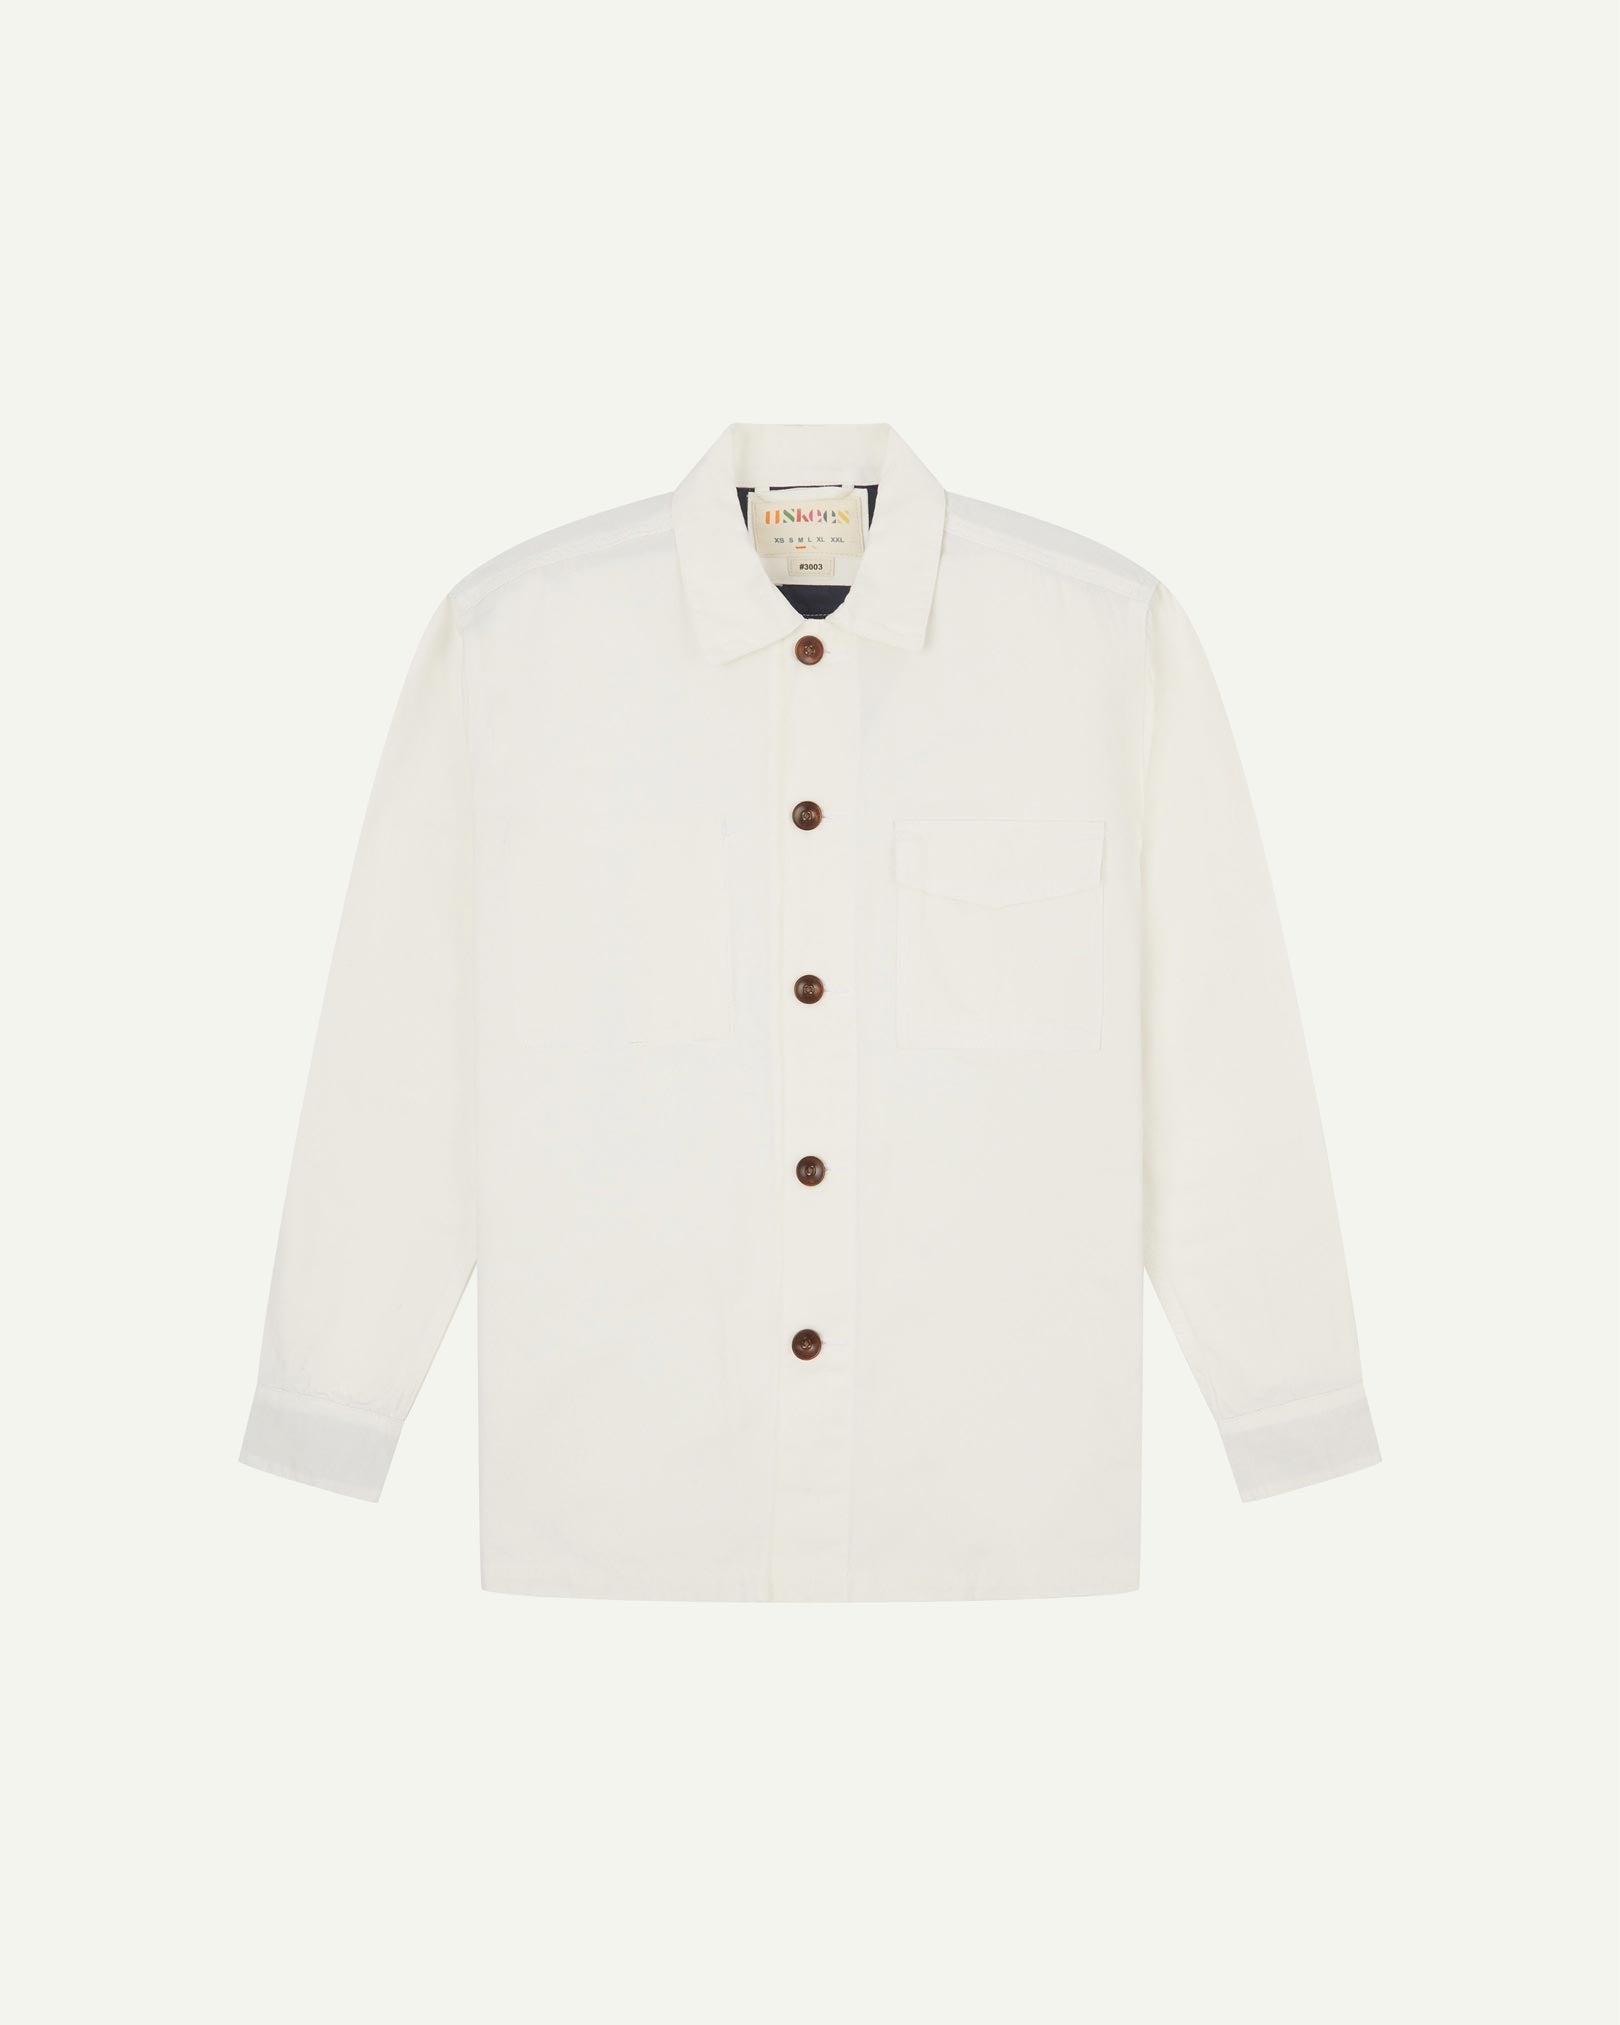 Cream buttoned organic cotton workshirt from Uskees with clear view of chest pocket and Uskees branding label.